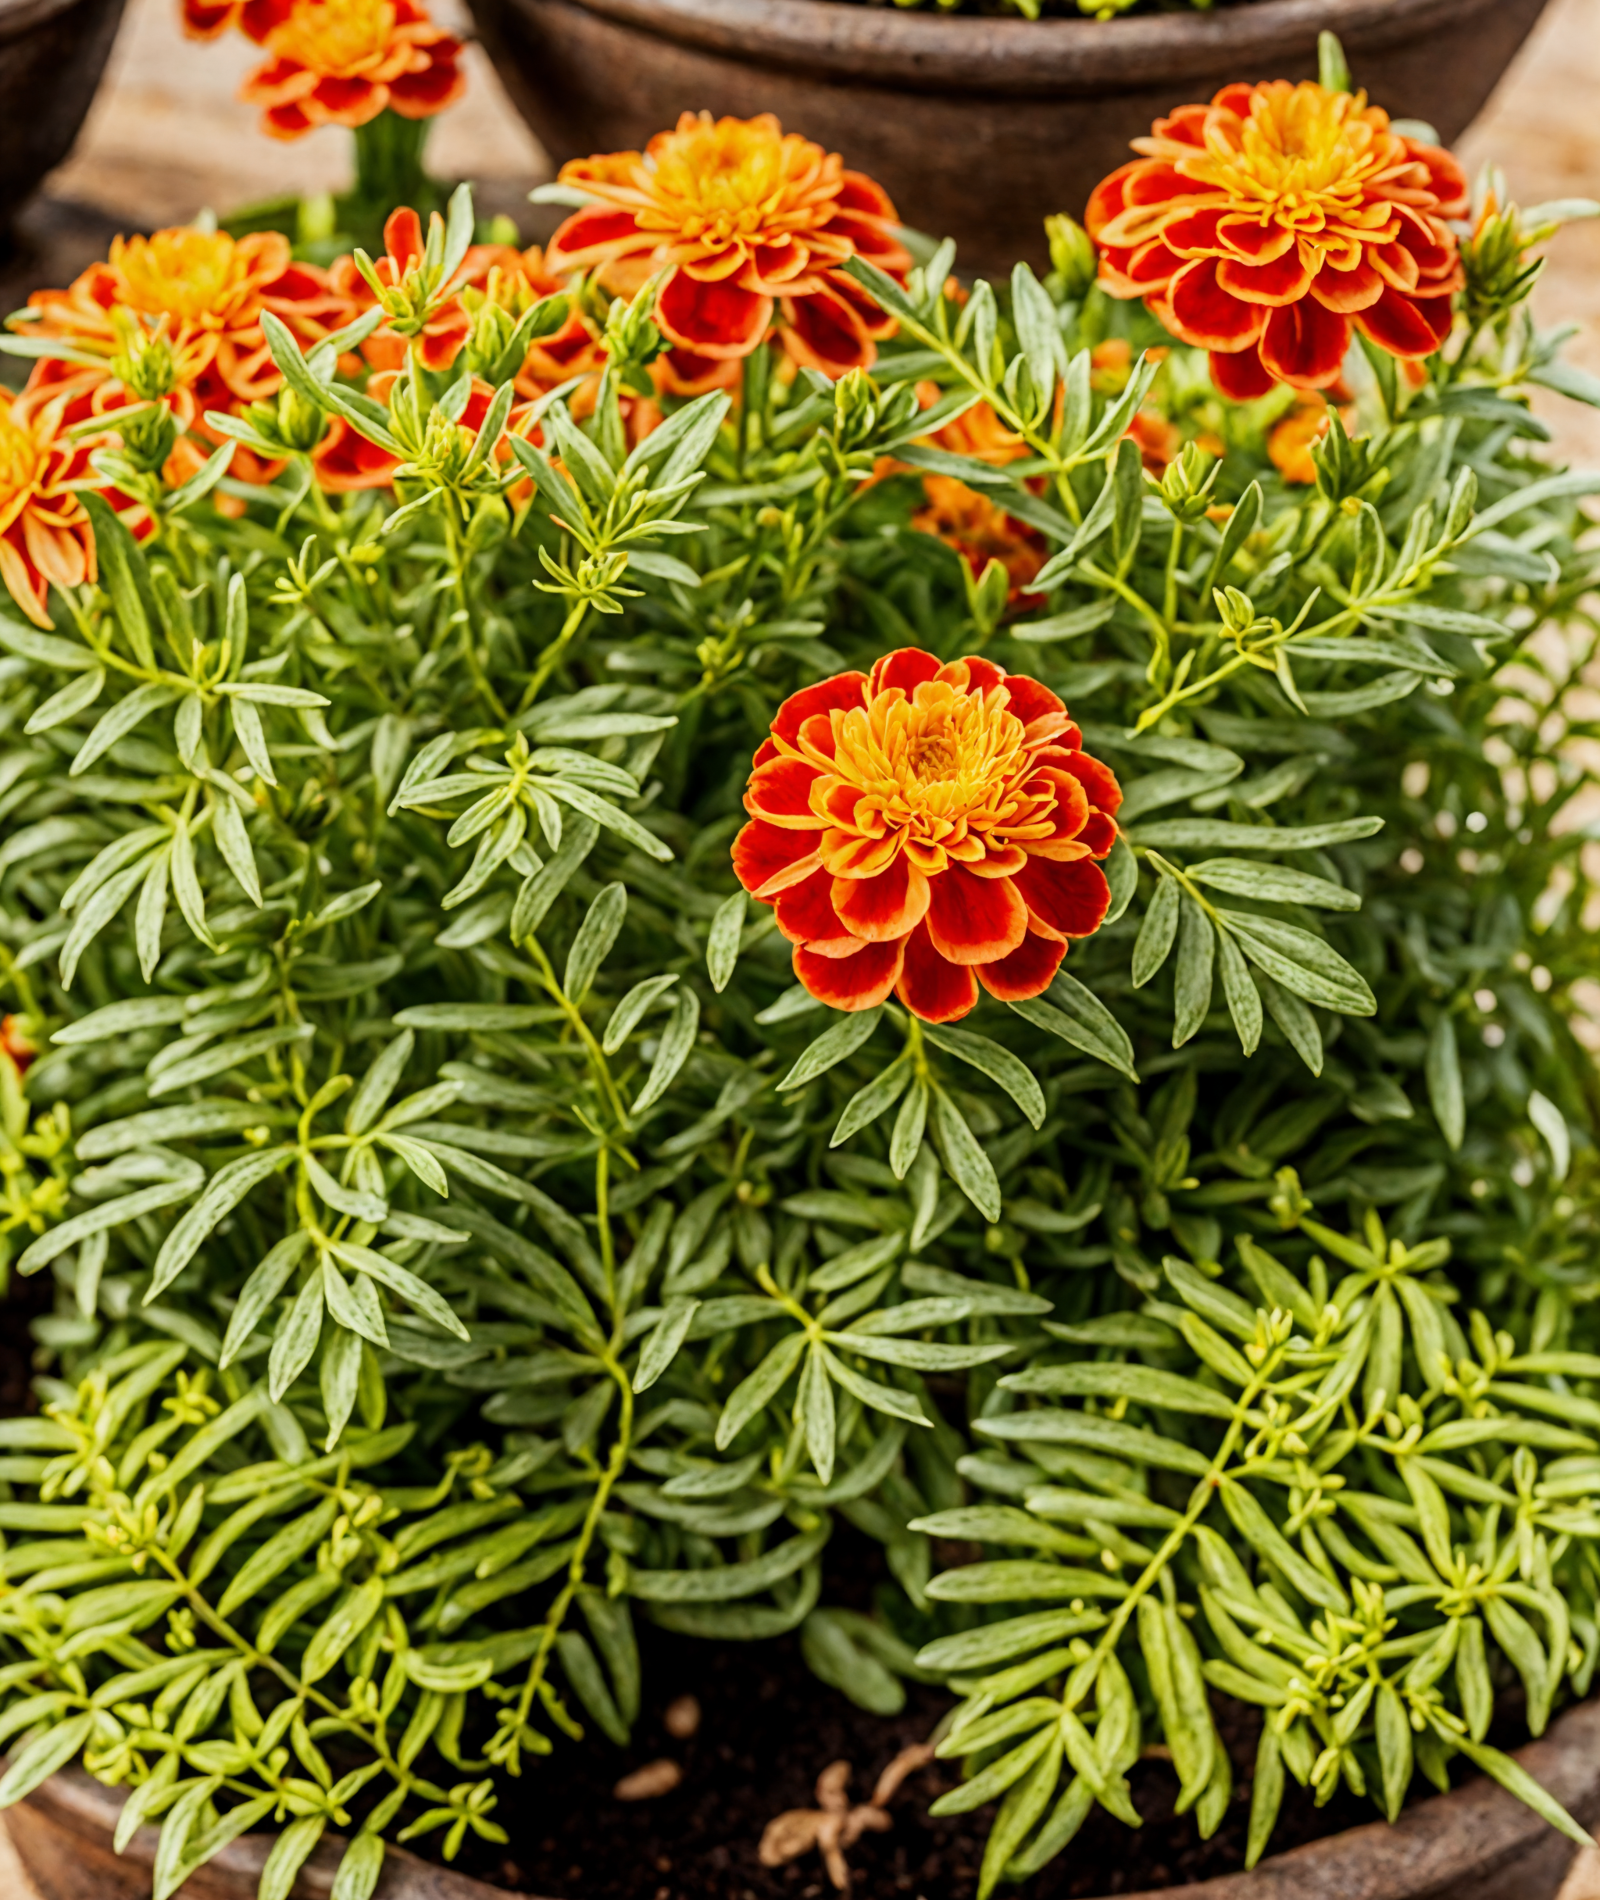 A bowl of vibrant Tagetes erecta flowers in red and orange hues, with clear lighting against a dark background.